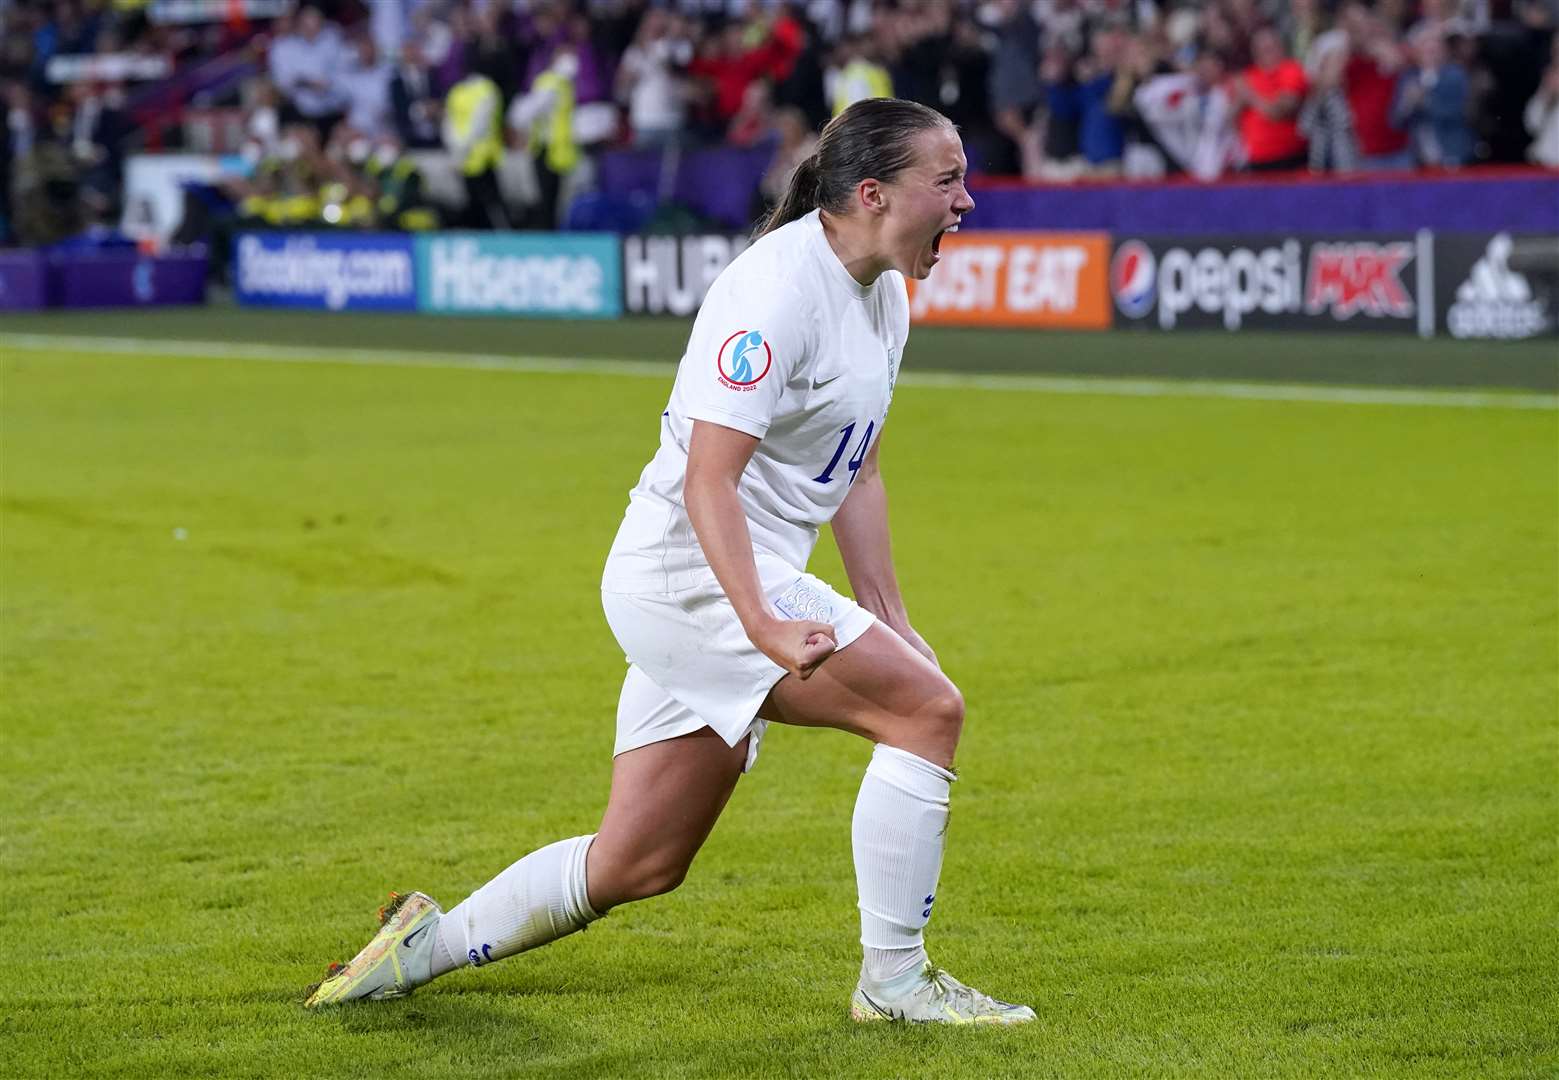 England’s Fran Kirby celebrates scoring their side’s fourth goal of the game during the Women’s Euro 2022 semi-final match at Bramall Lane in Sheffield (Danny Lawson/PA)